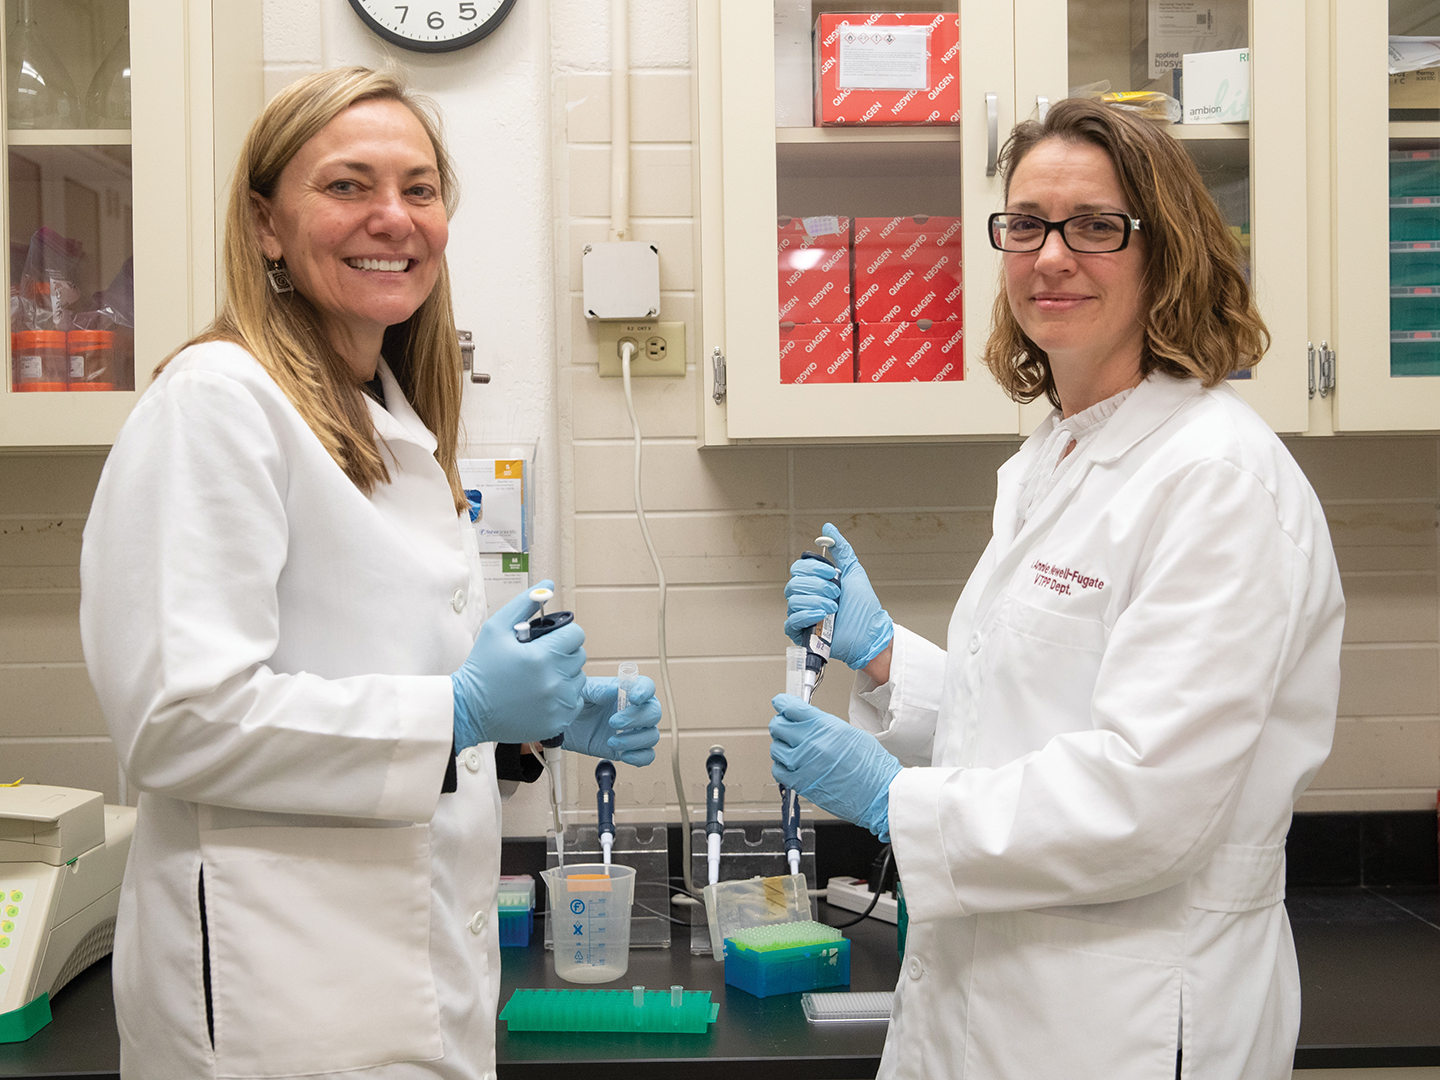 Drs. Cristine Heaps and Annie Newell-Fugate working in a research lab